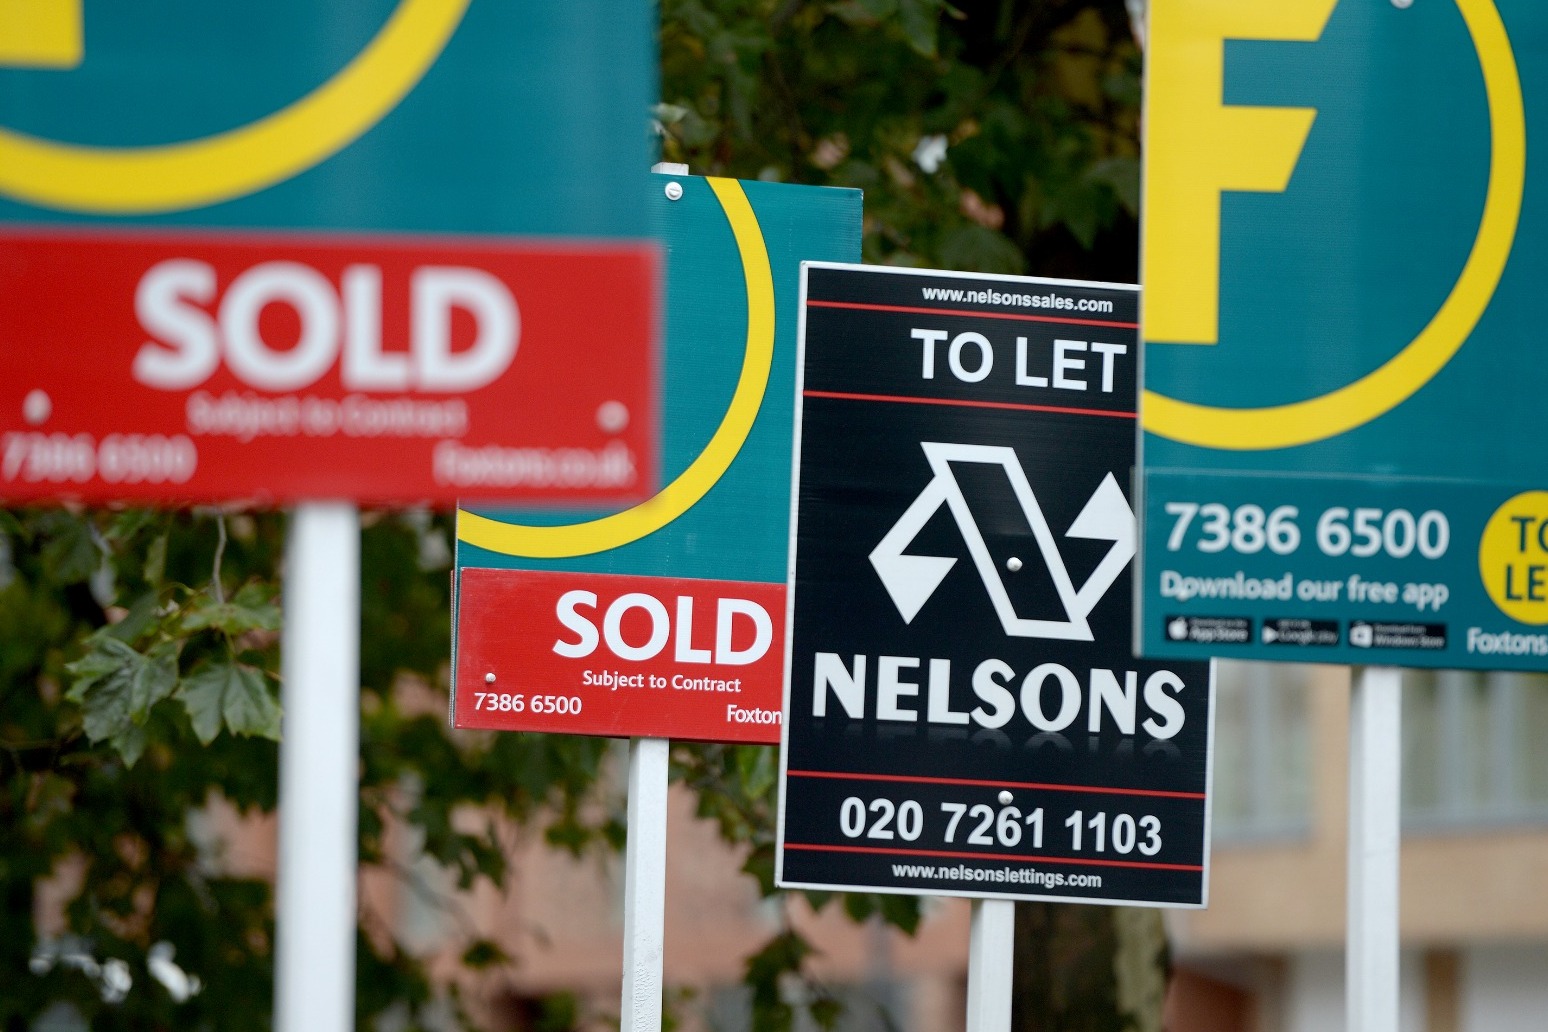 UK mortgage approvals increase after interest rates held at 5.25% 